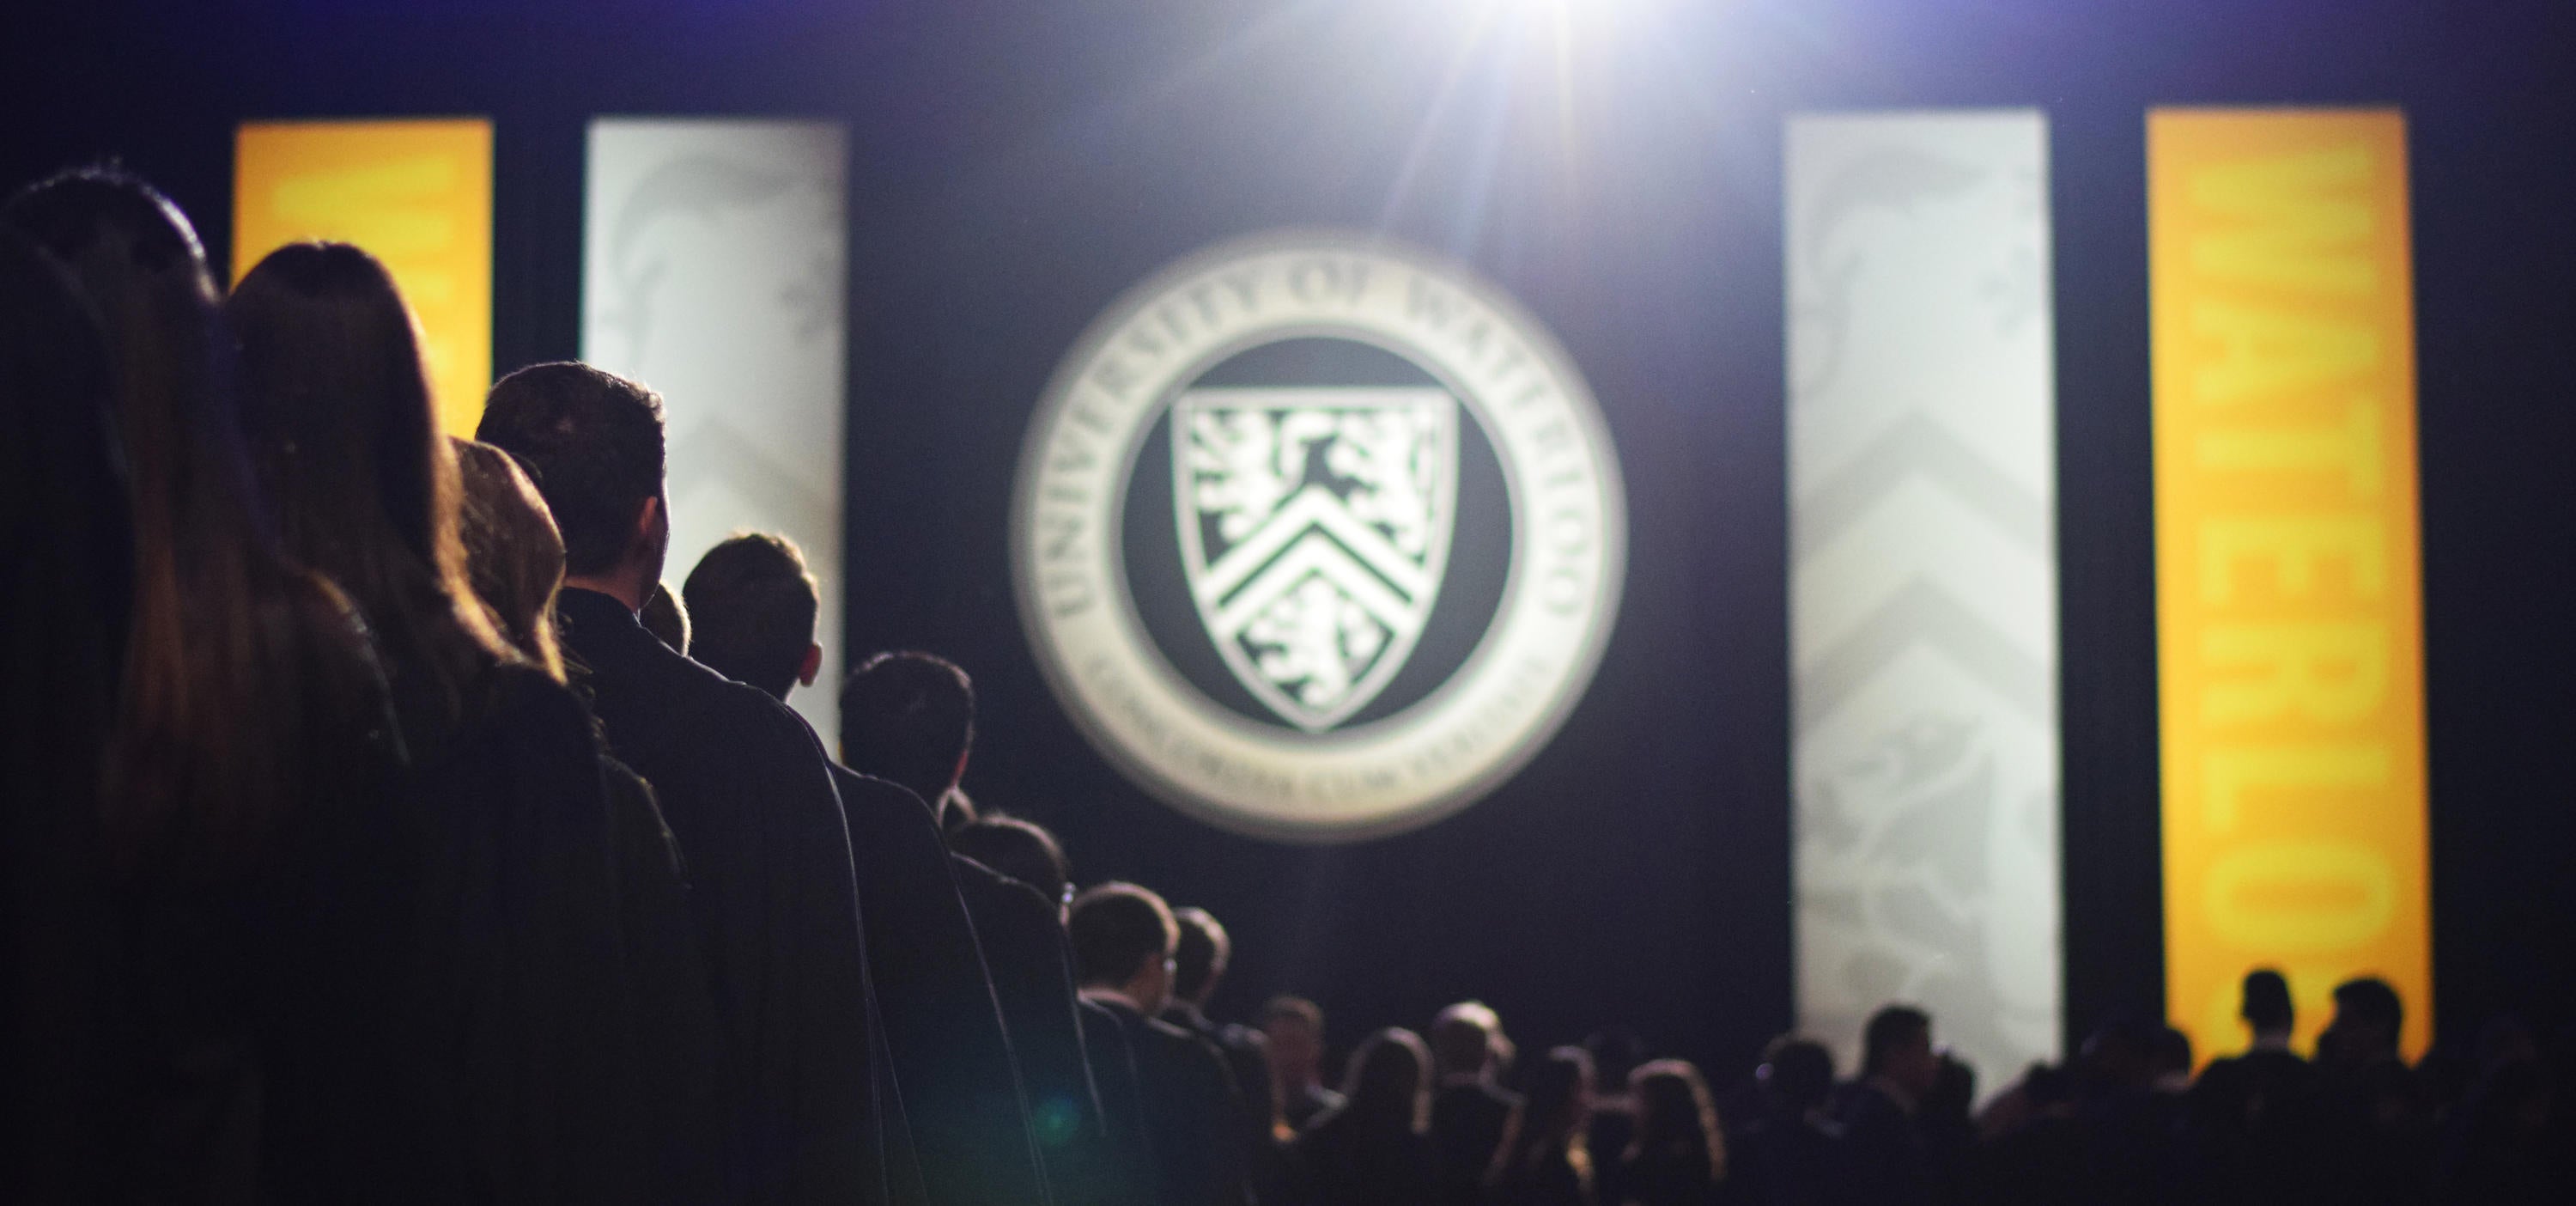 Shadow of students in line at convocation with the University of Waterloo emblem in the background